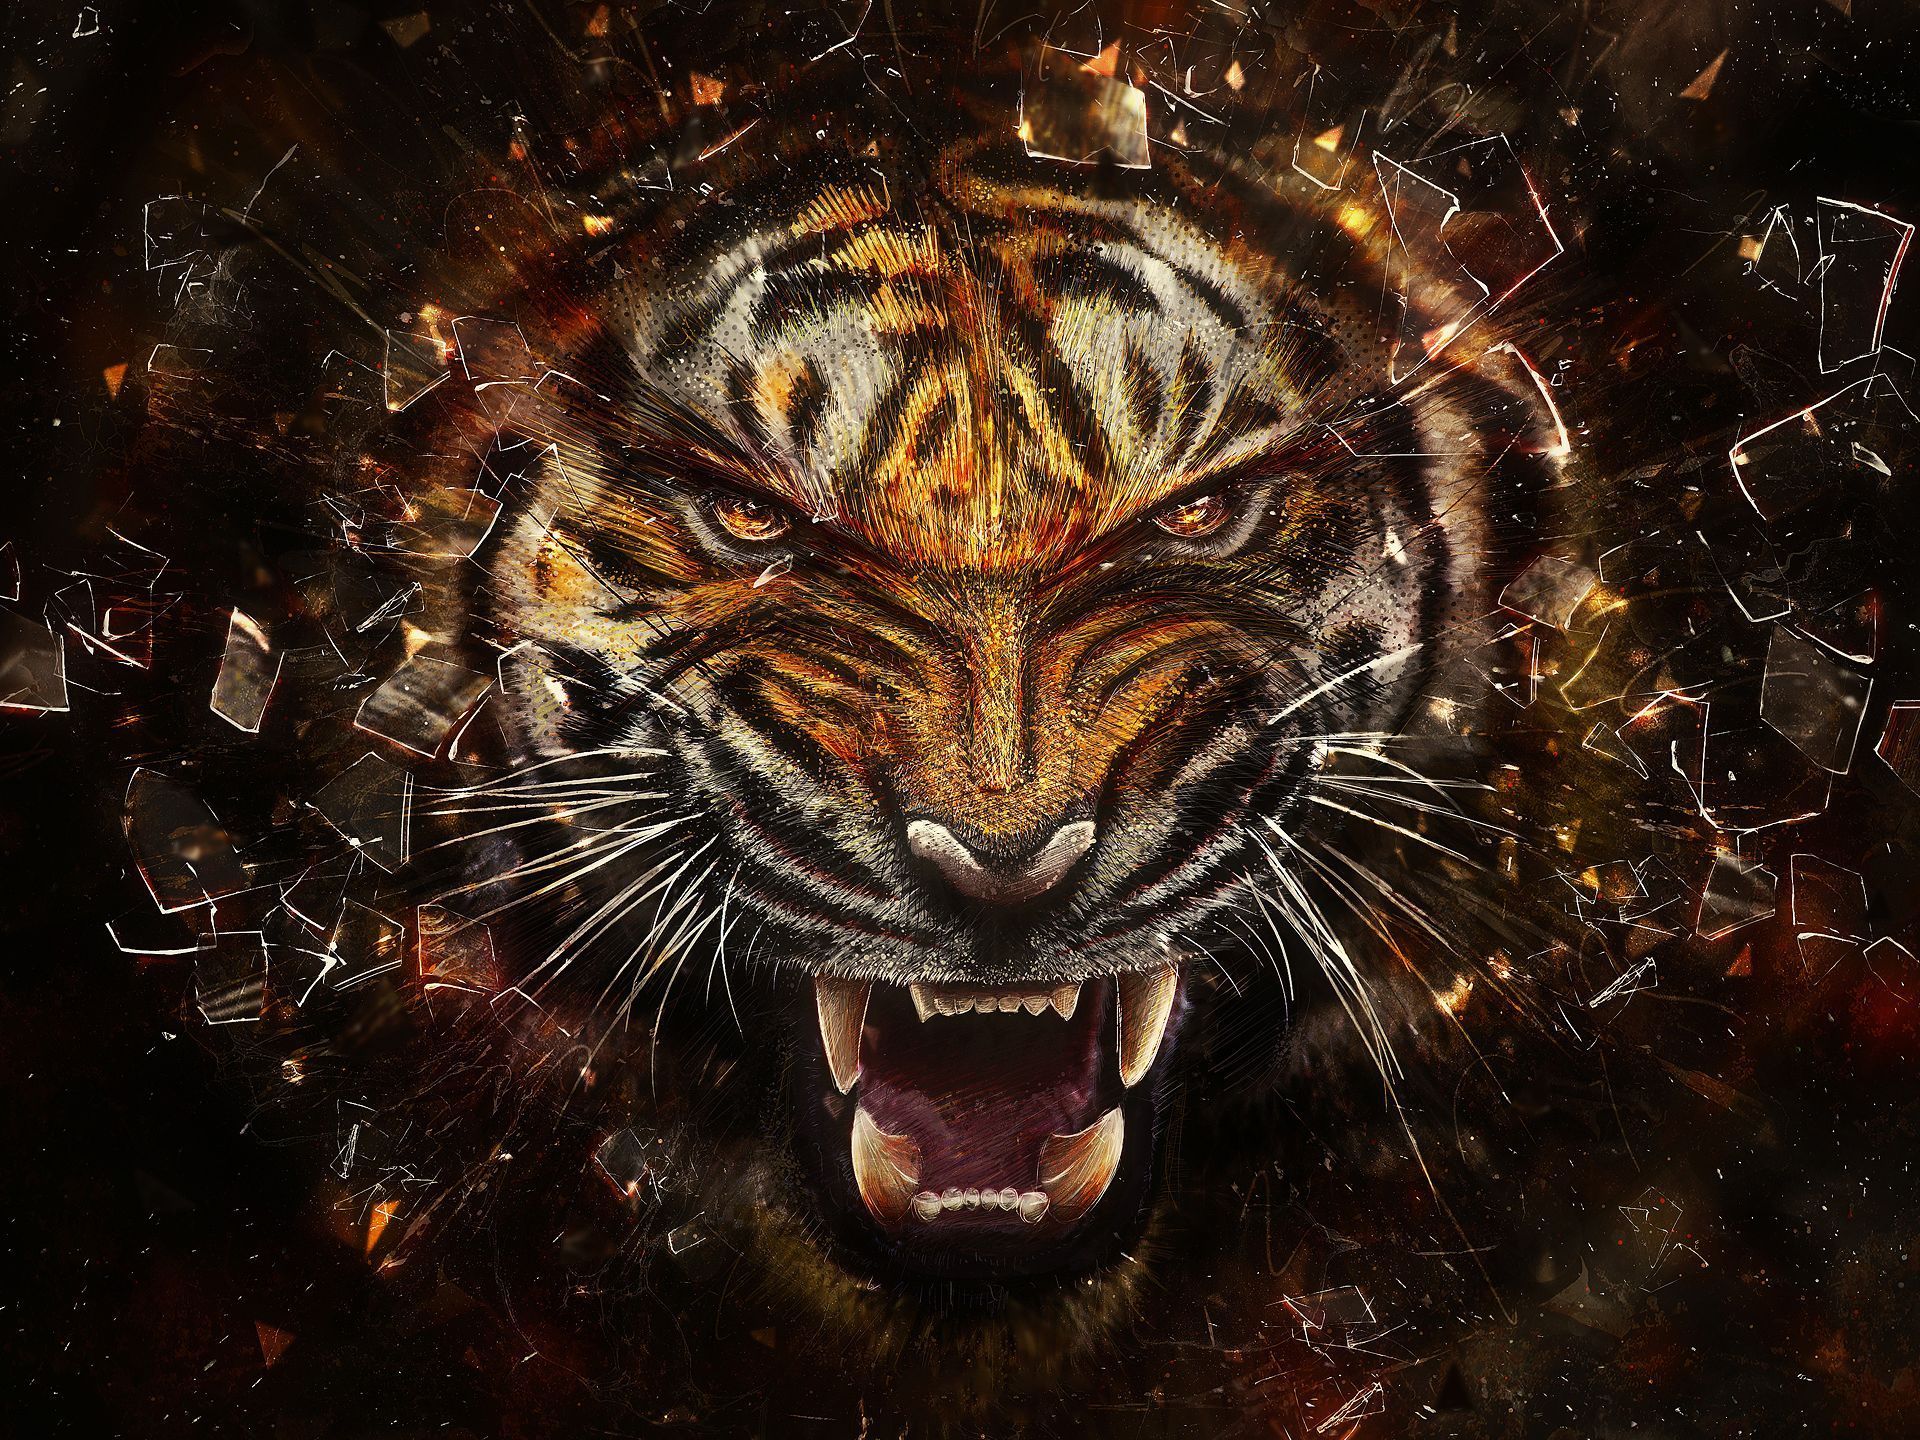 Angry Tiger - Tigers Wallpaper (31737545) - Fanpop